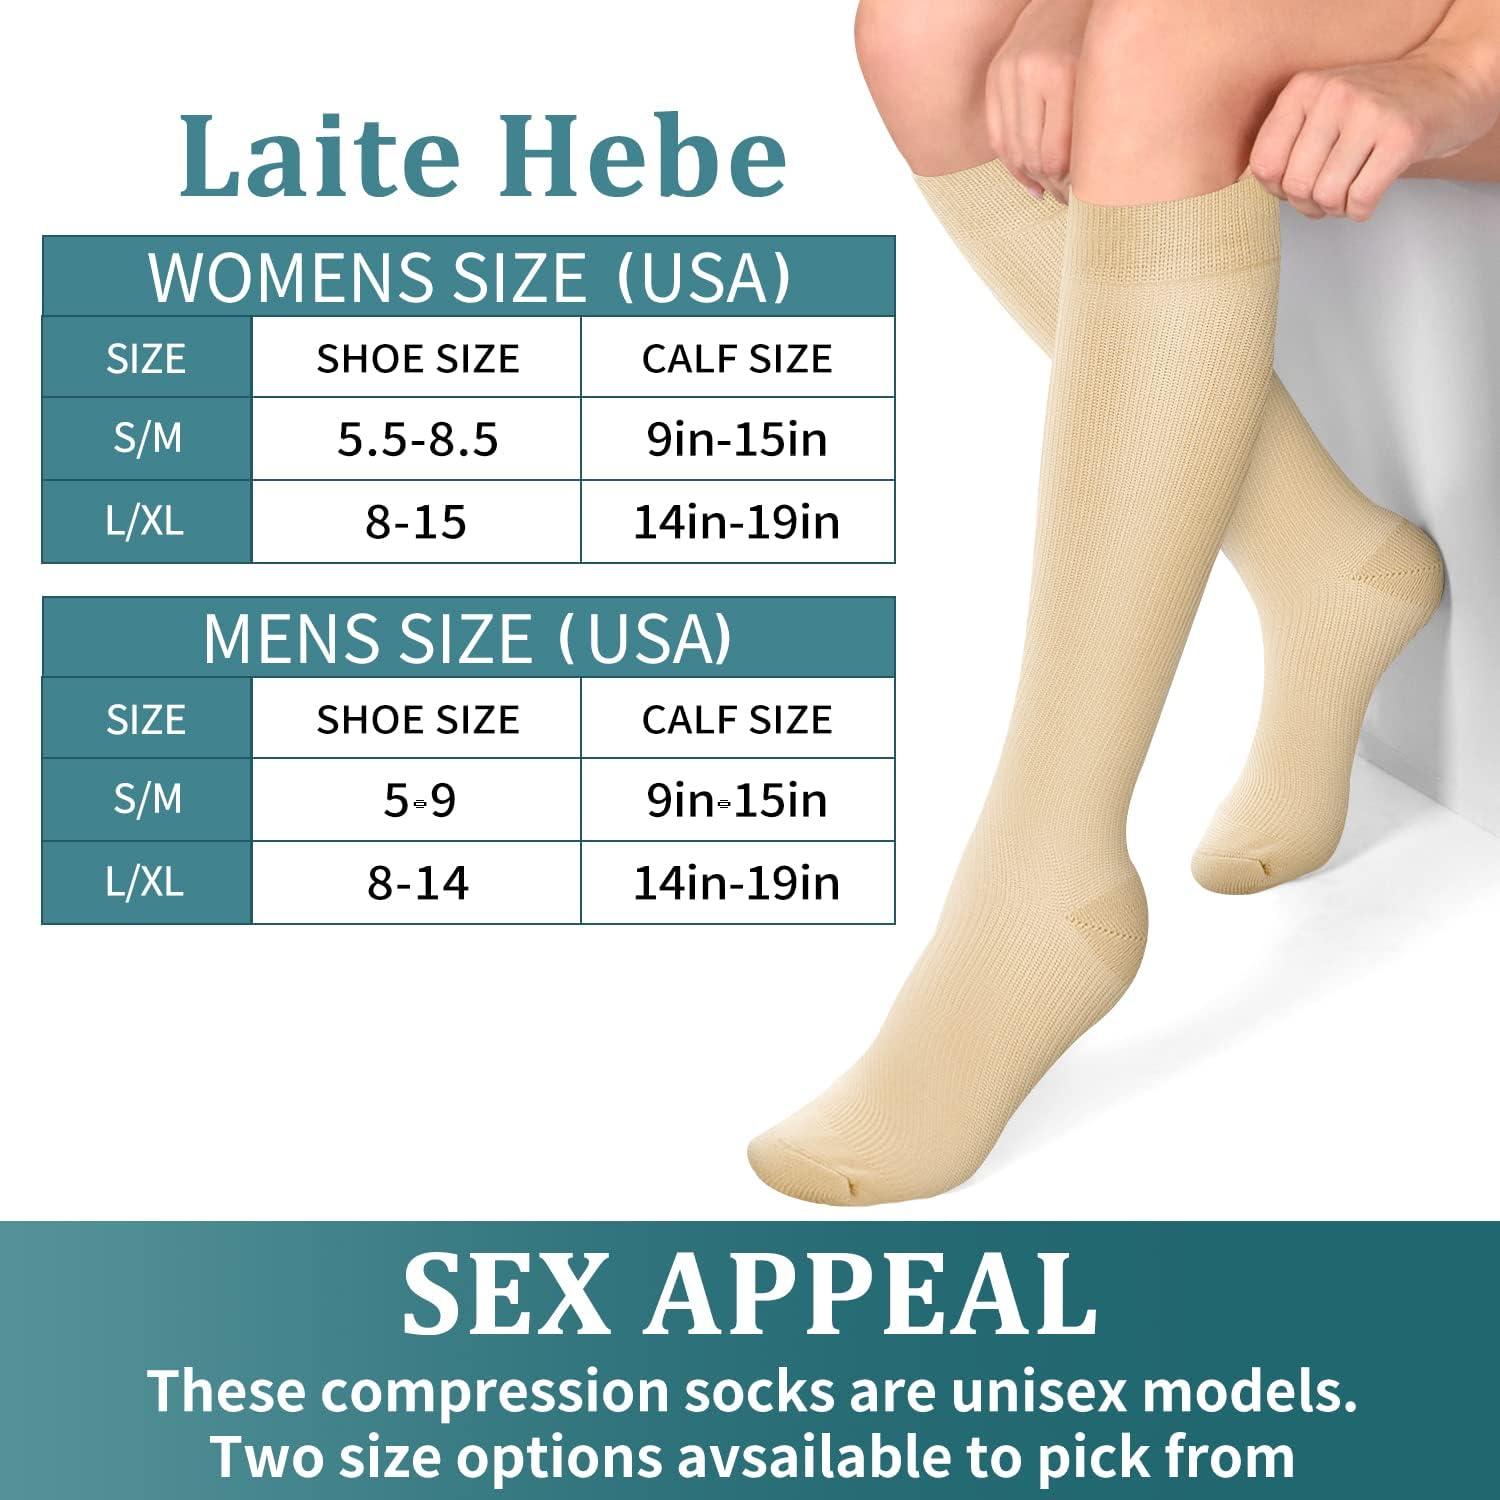 GetUSCart- Laite Hebe Compression Socks,(3 Pairs) Compression Sock for  Women & Men - Best for Running, Athletic Sports, Crossfit, Flight  Travel(Multti-colors8-L/XL)